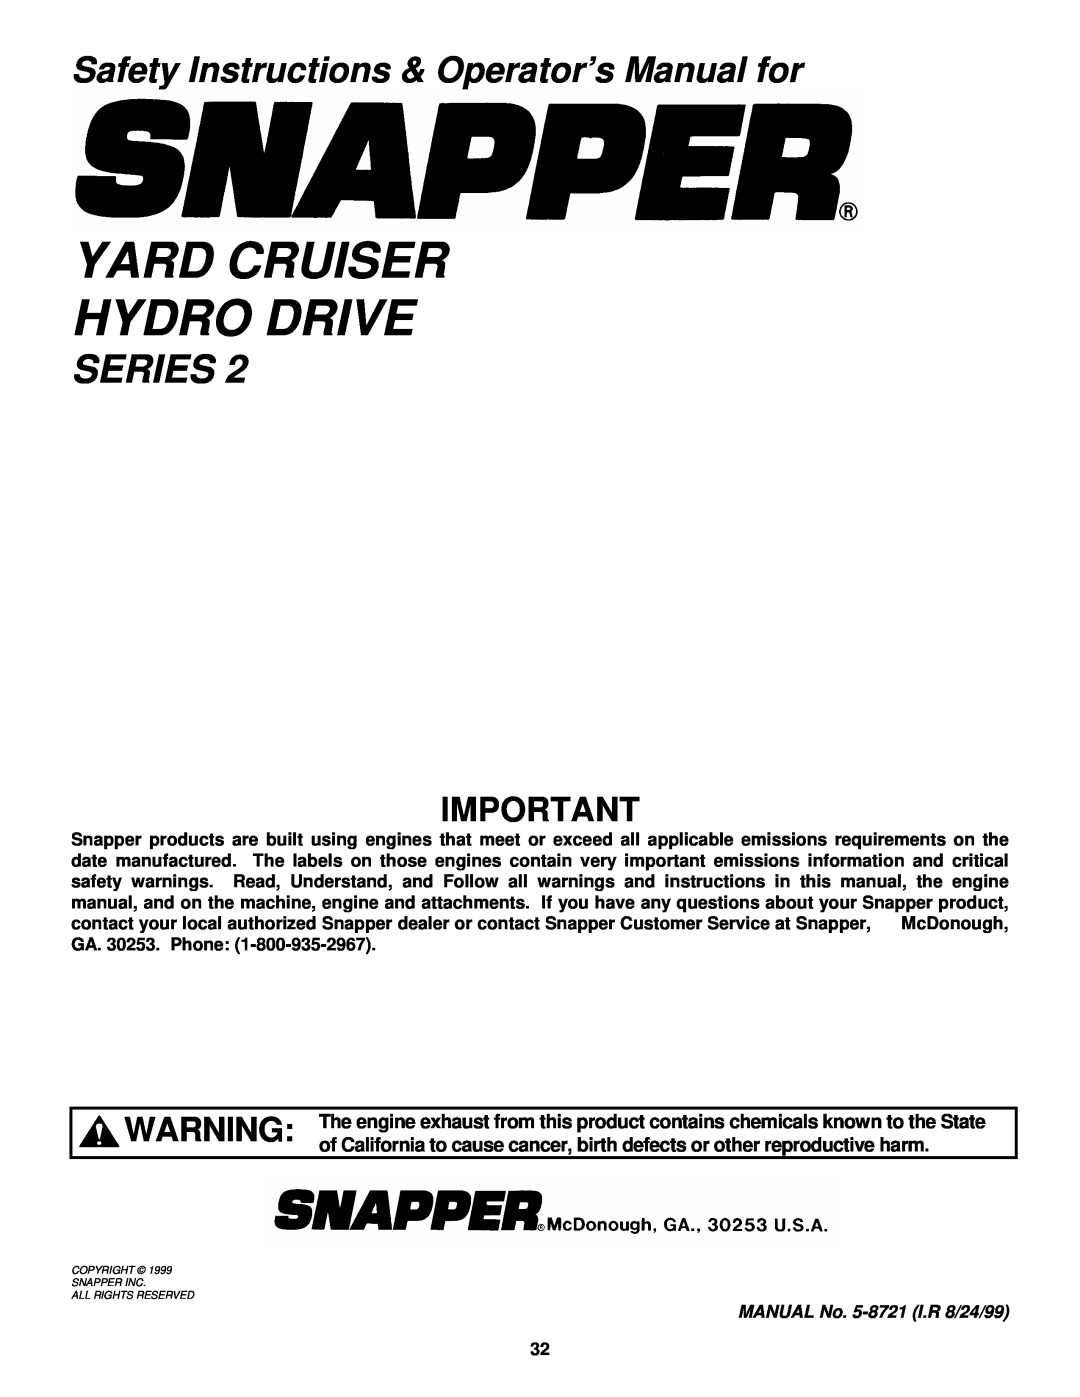 Snapper YZ145332BVE, YZ145382BVE Series, Yard Cruiser Hydro Drive, Safety Instructions & Operator’s Manual for 